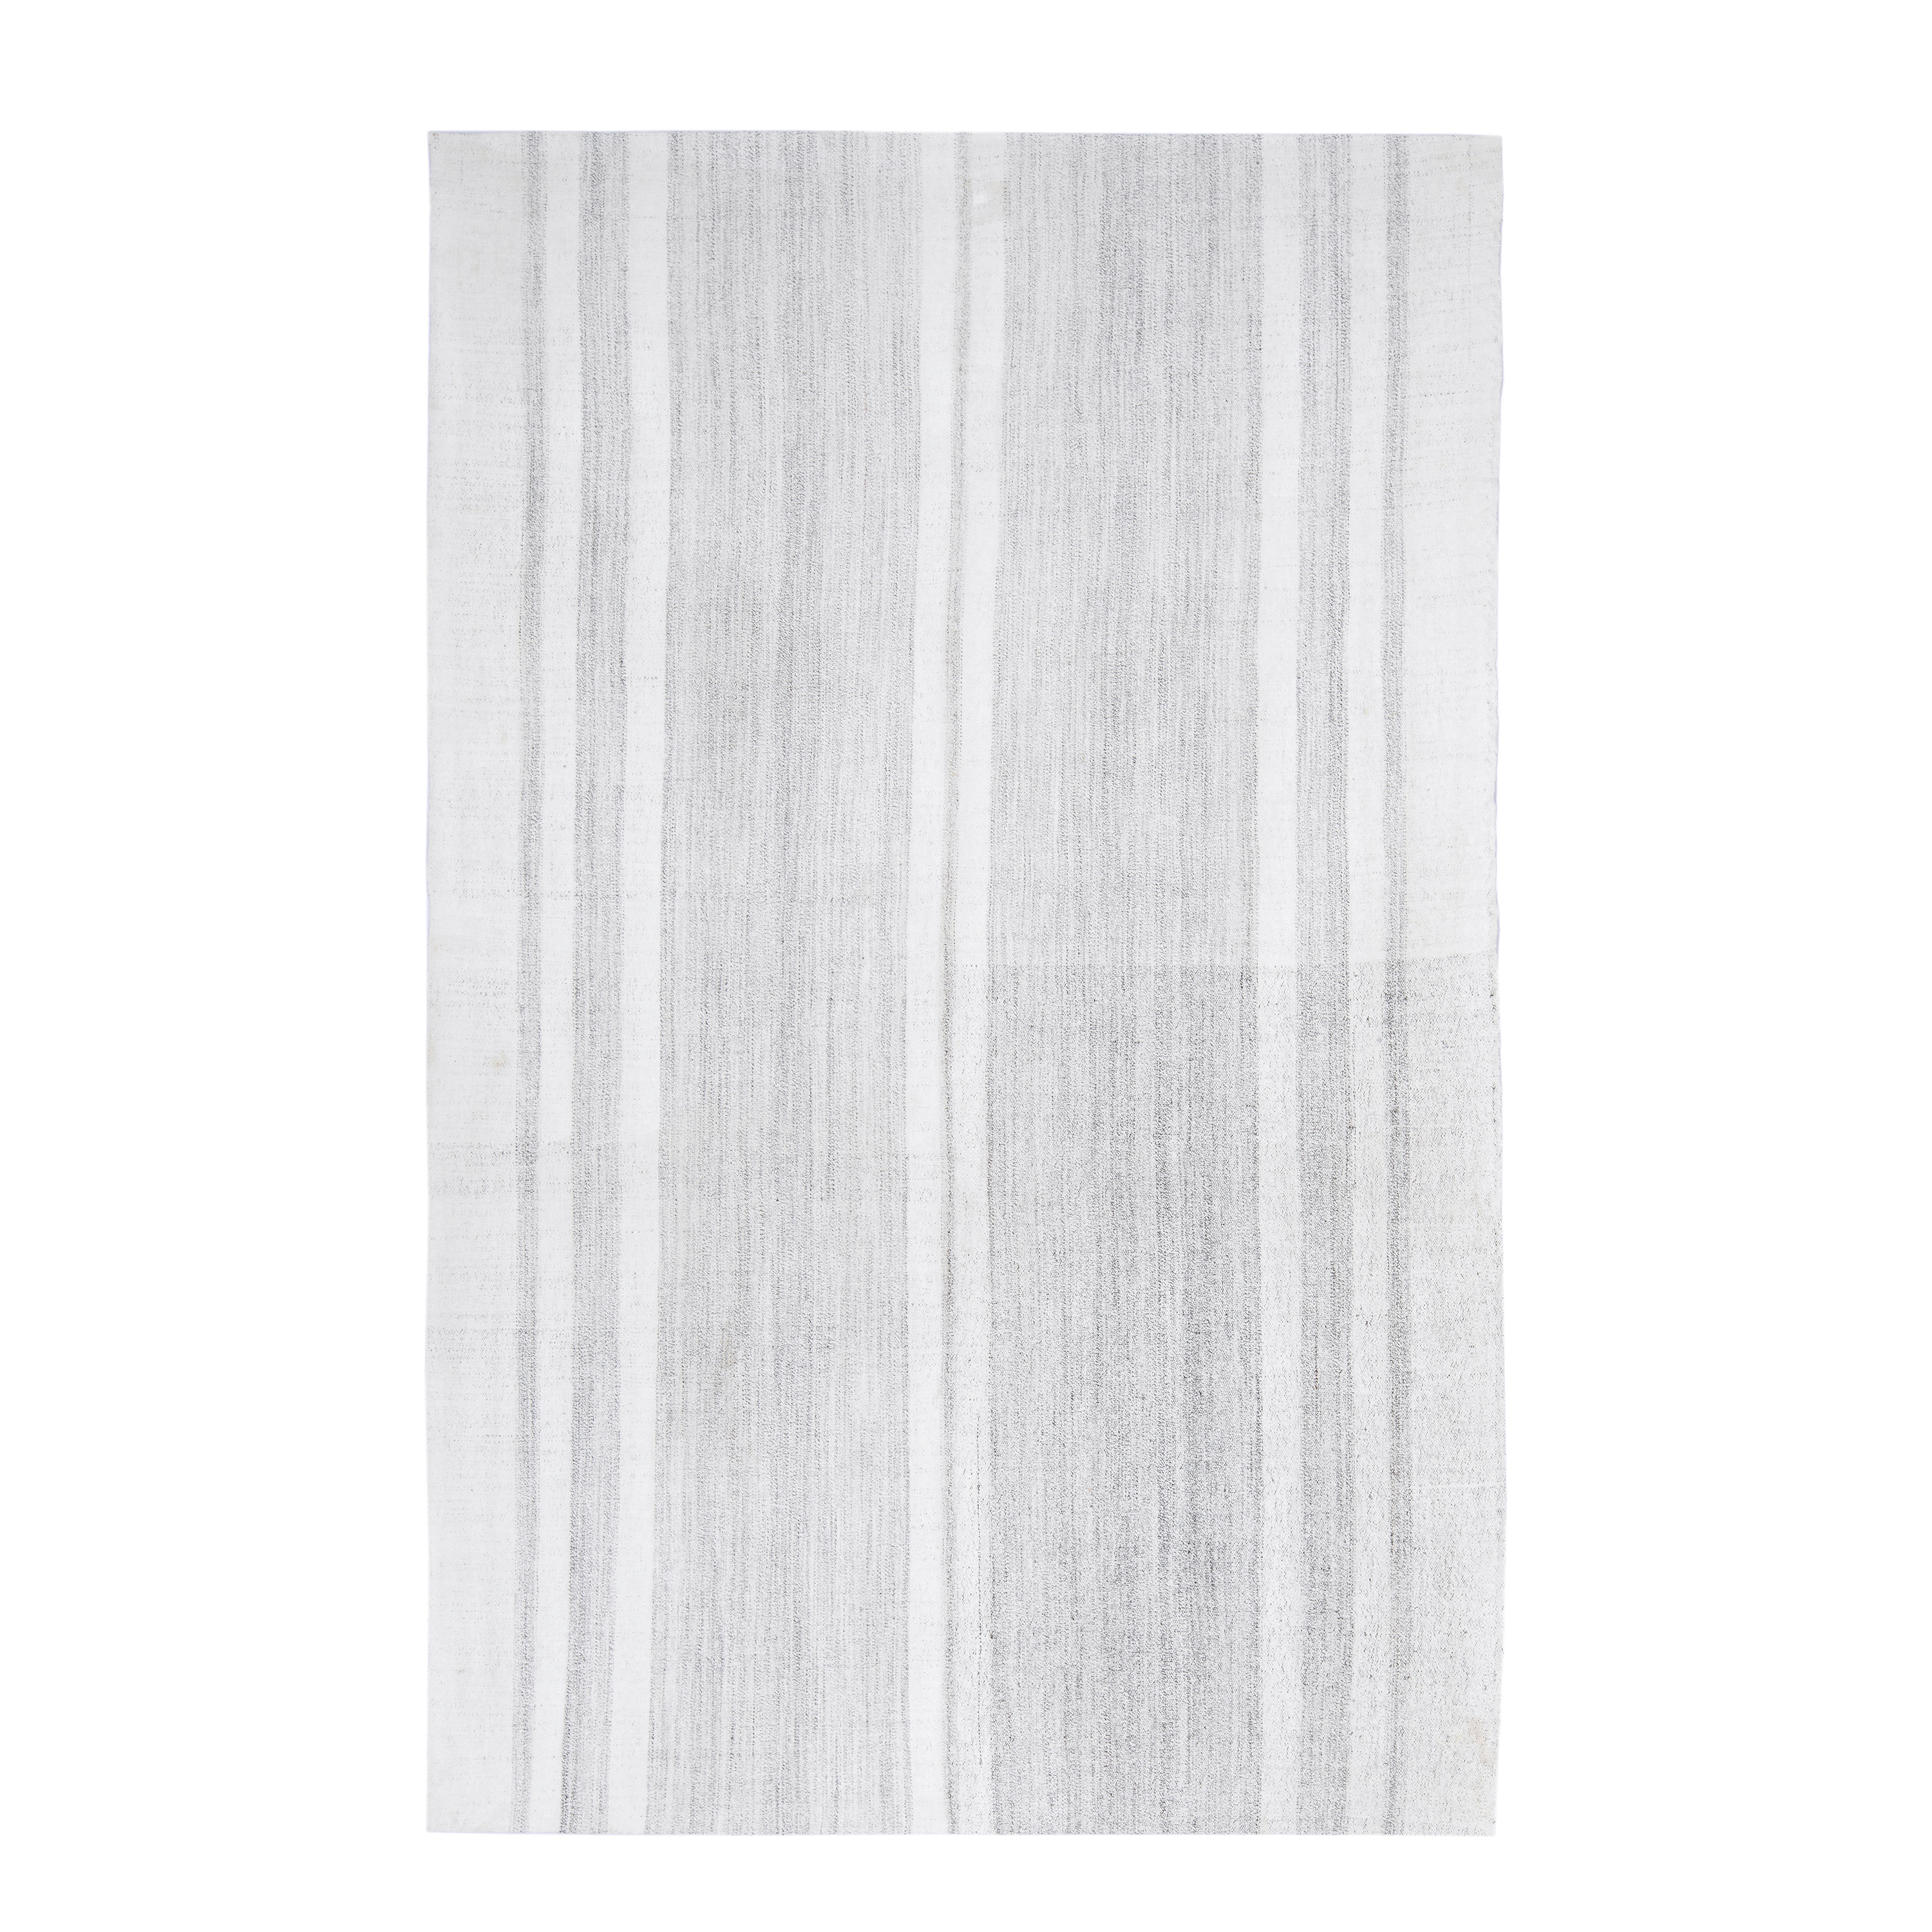 This Stripe Rug flatweave is hand-woven and made with wool and linen.